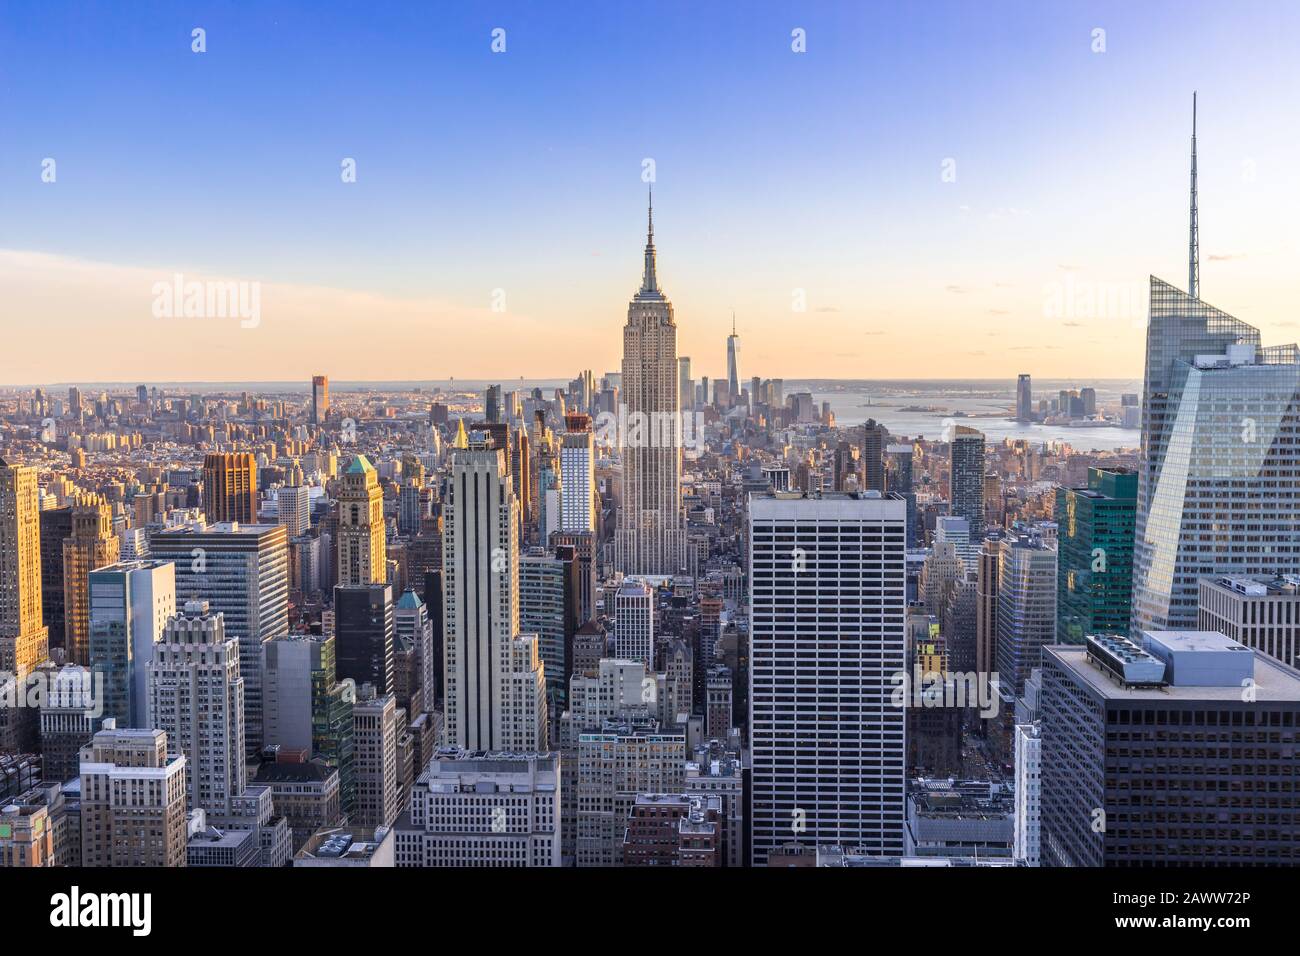 New York City Skyline in Manhattan downtown with Empire State Building and skyscrapers at sunset USA Stock Photo